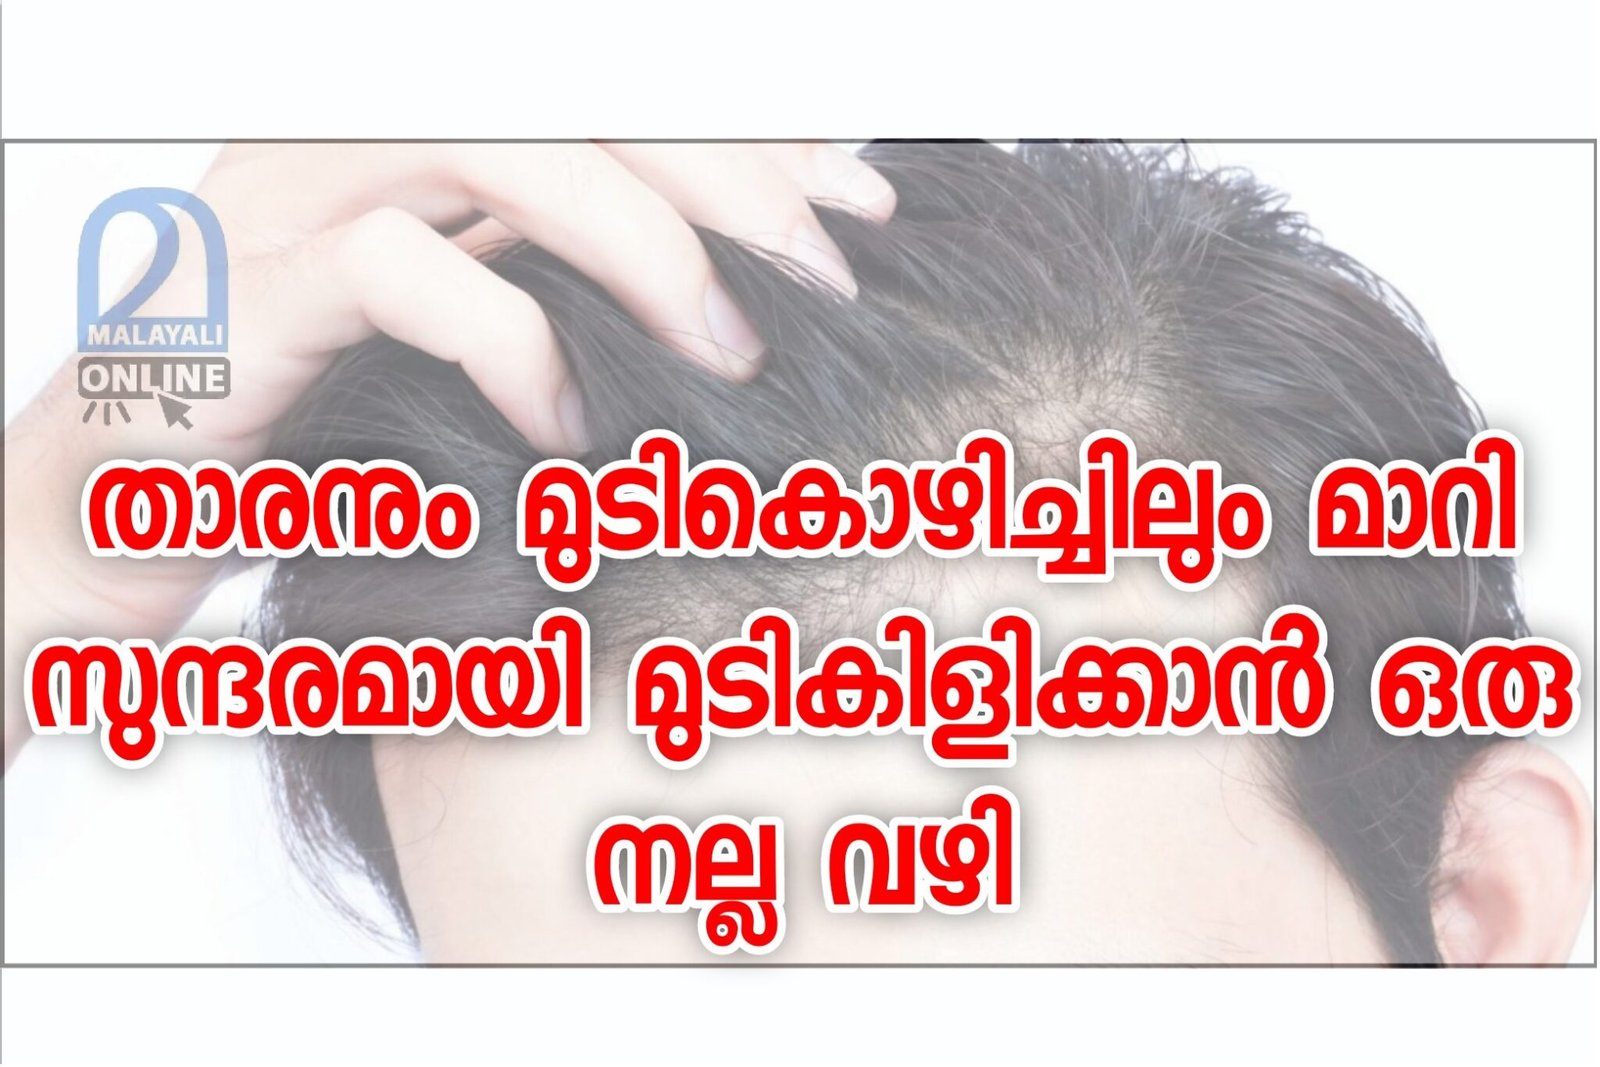 Some natural hair packs for hair to grow well - Malayali Online